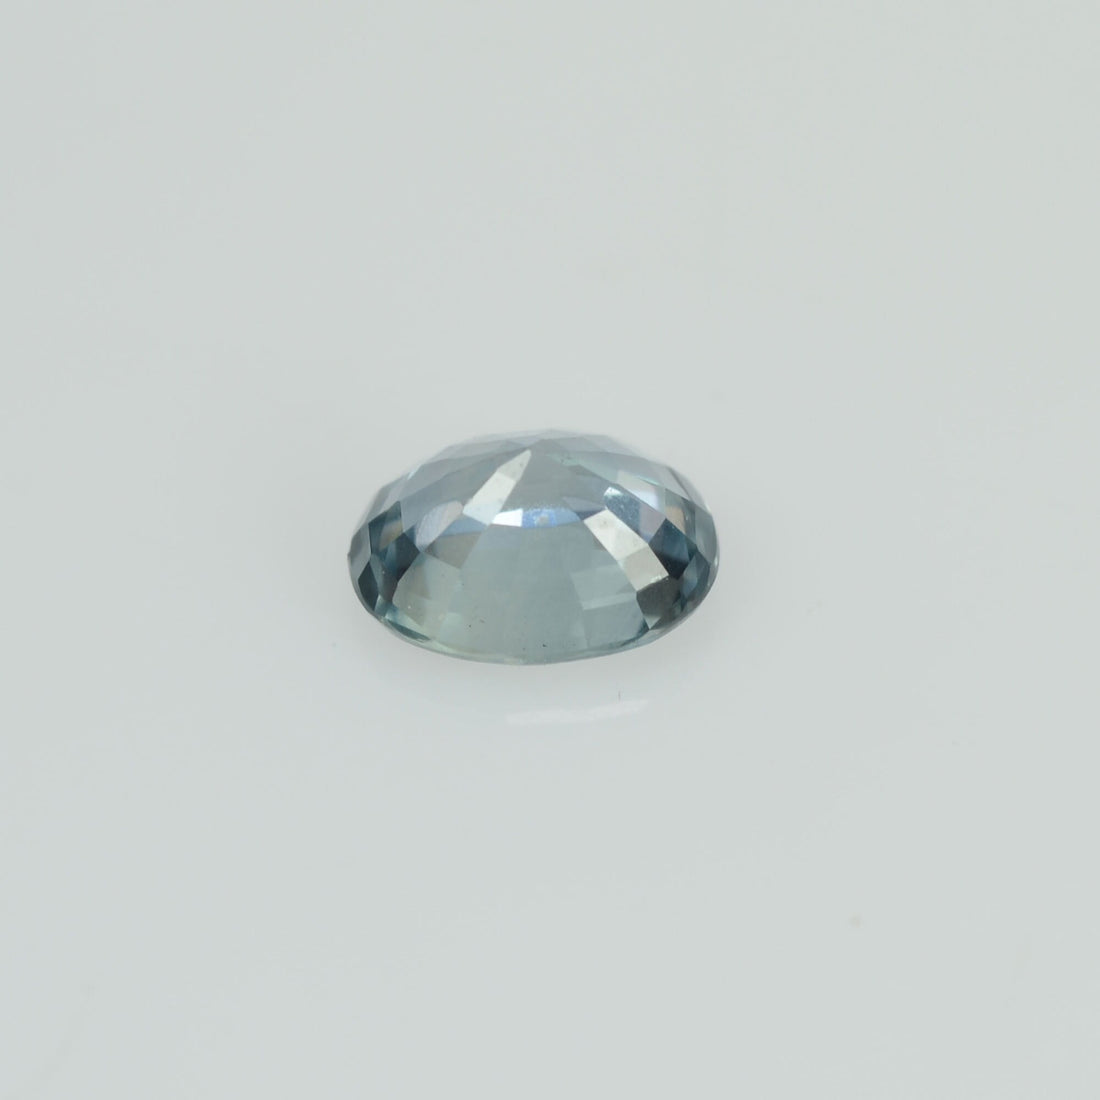 0.35 Cts Natural Teal Blue Green Sapphire Loose Gemstone Oval Cut